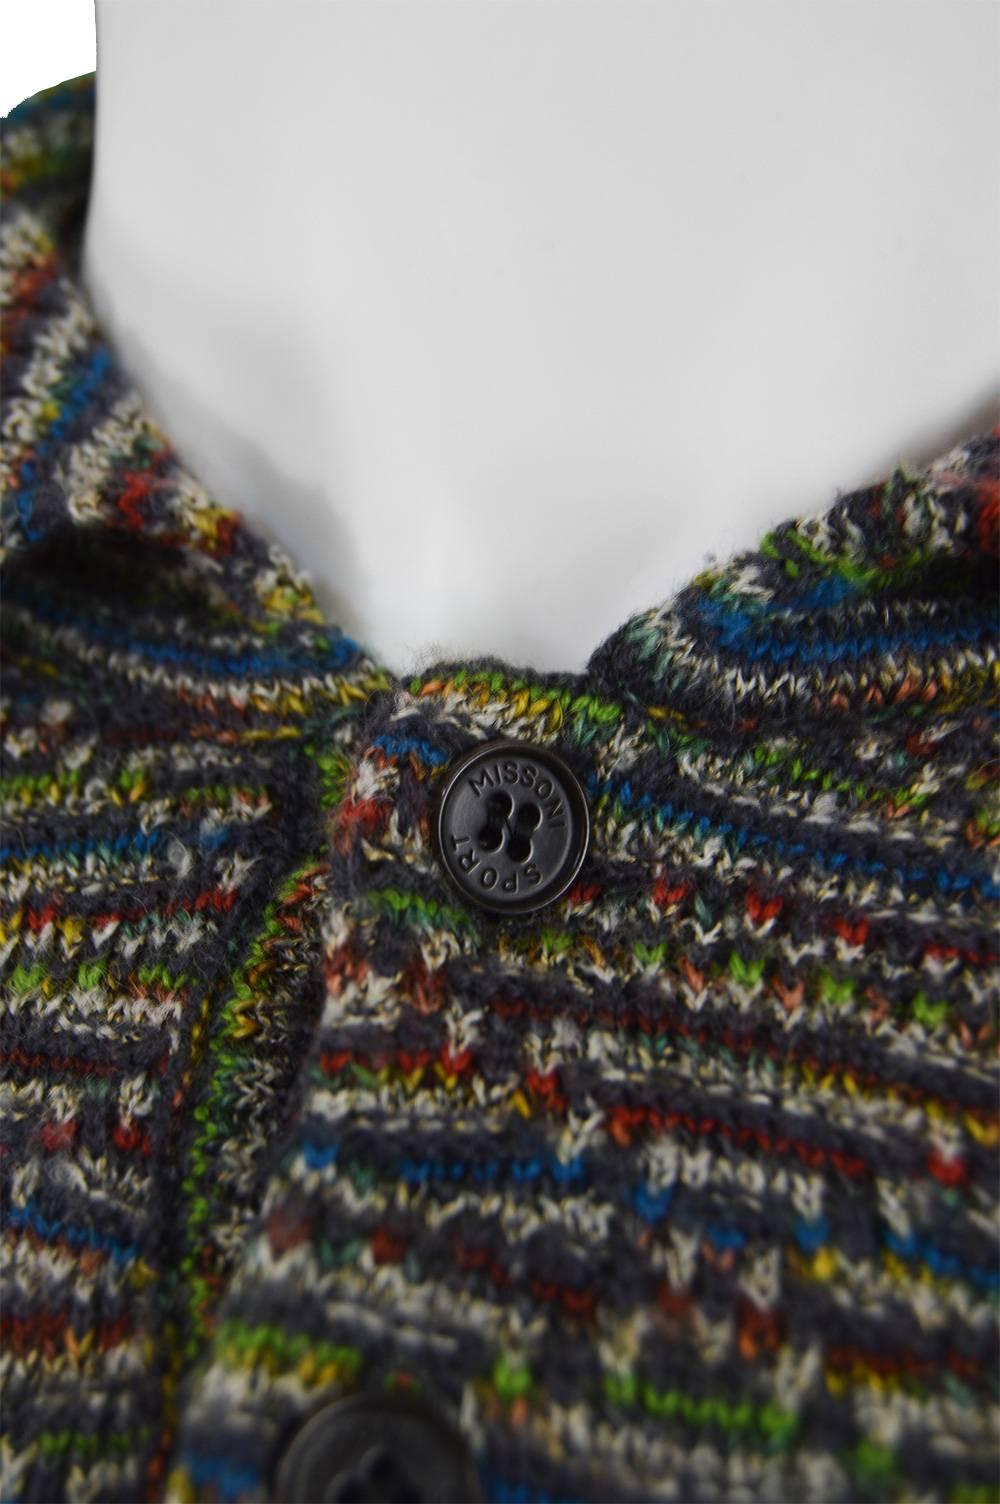 Missoni Men's Vintage Textured Wool, Acrylic & Alpaca Knit Sweater, 1990s In Excellent Condition For Sale In Doncaster, South Yorkshire